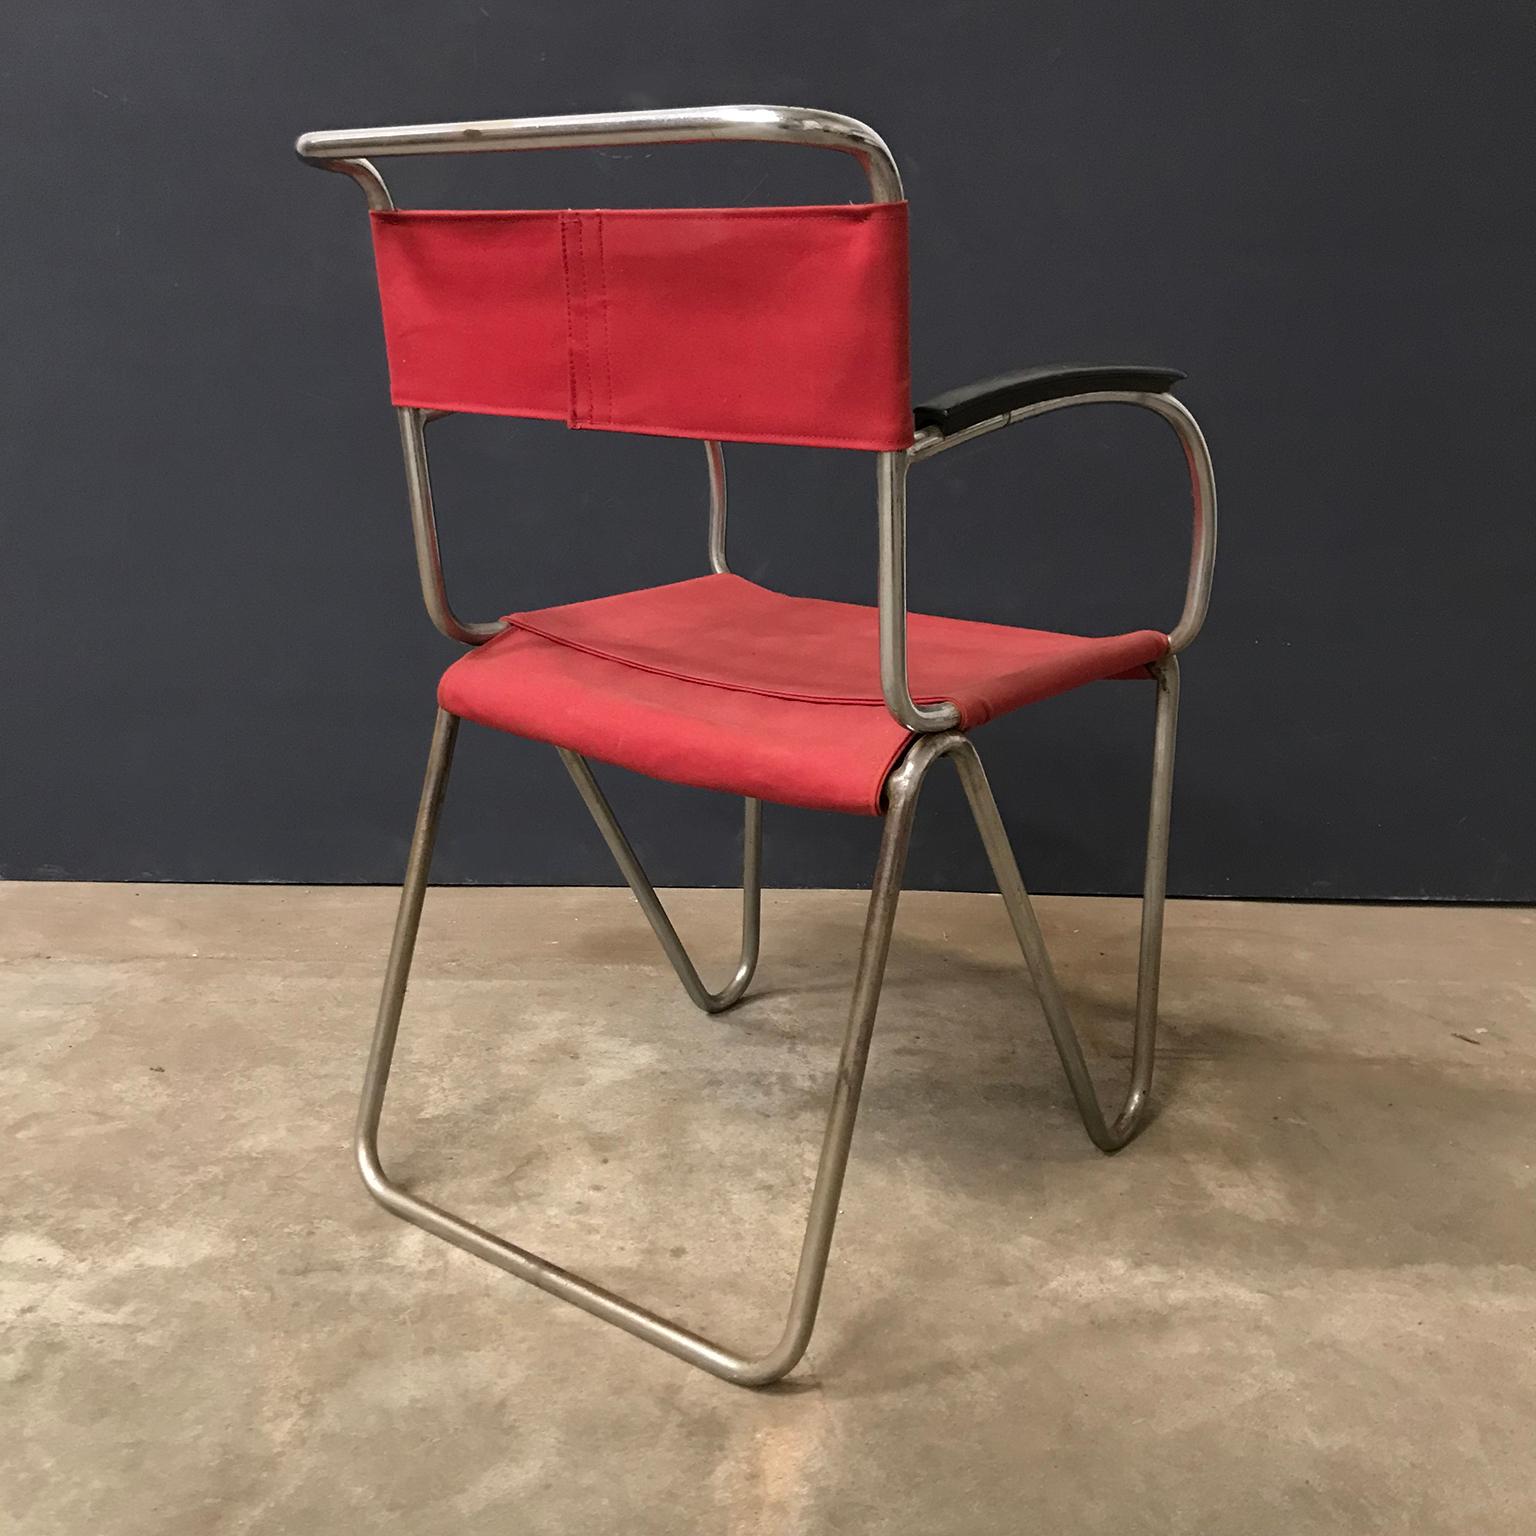 Mid-20th Century 1930, W.H. Gispen for Gispen, Diagonal Chair 1930 in Rope & New Red Canvas Cover For Sale